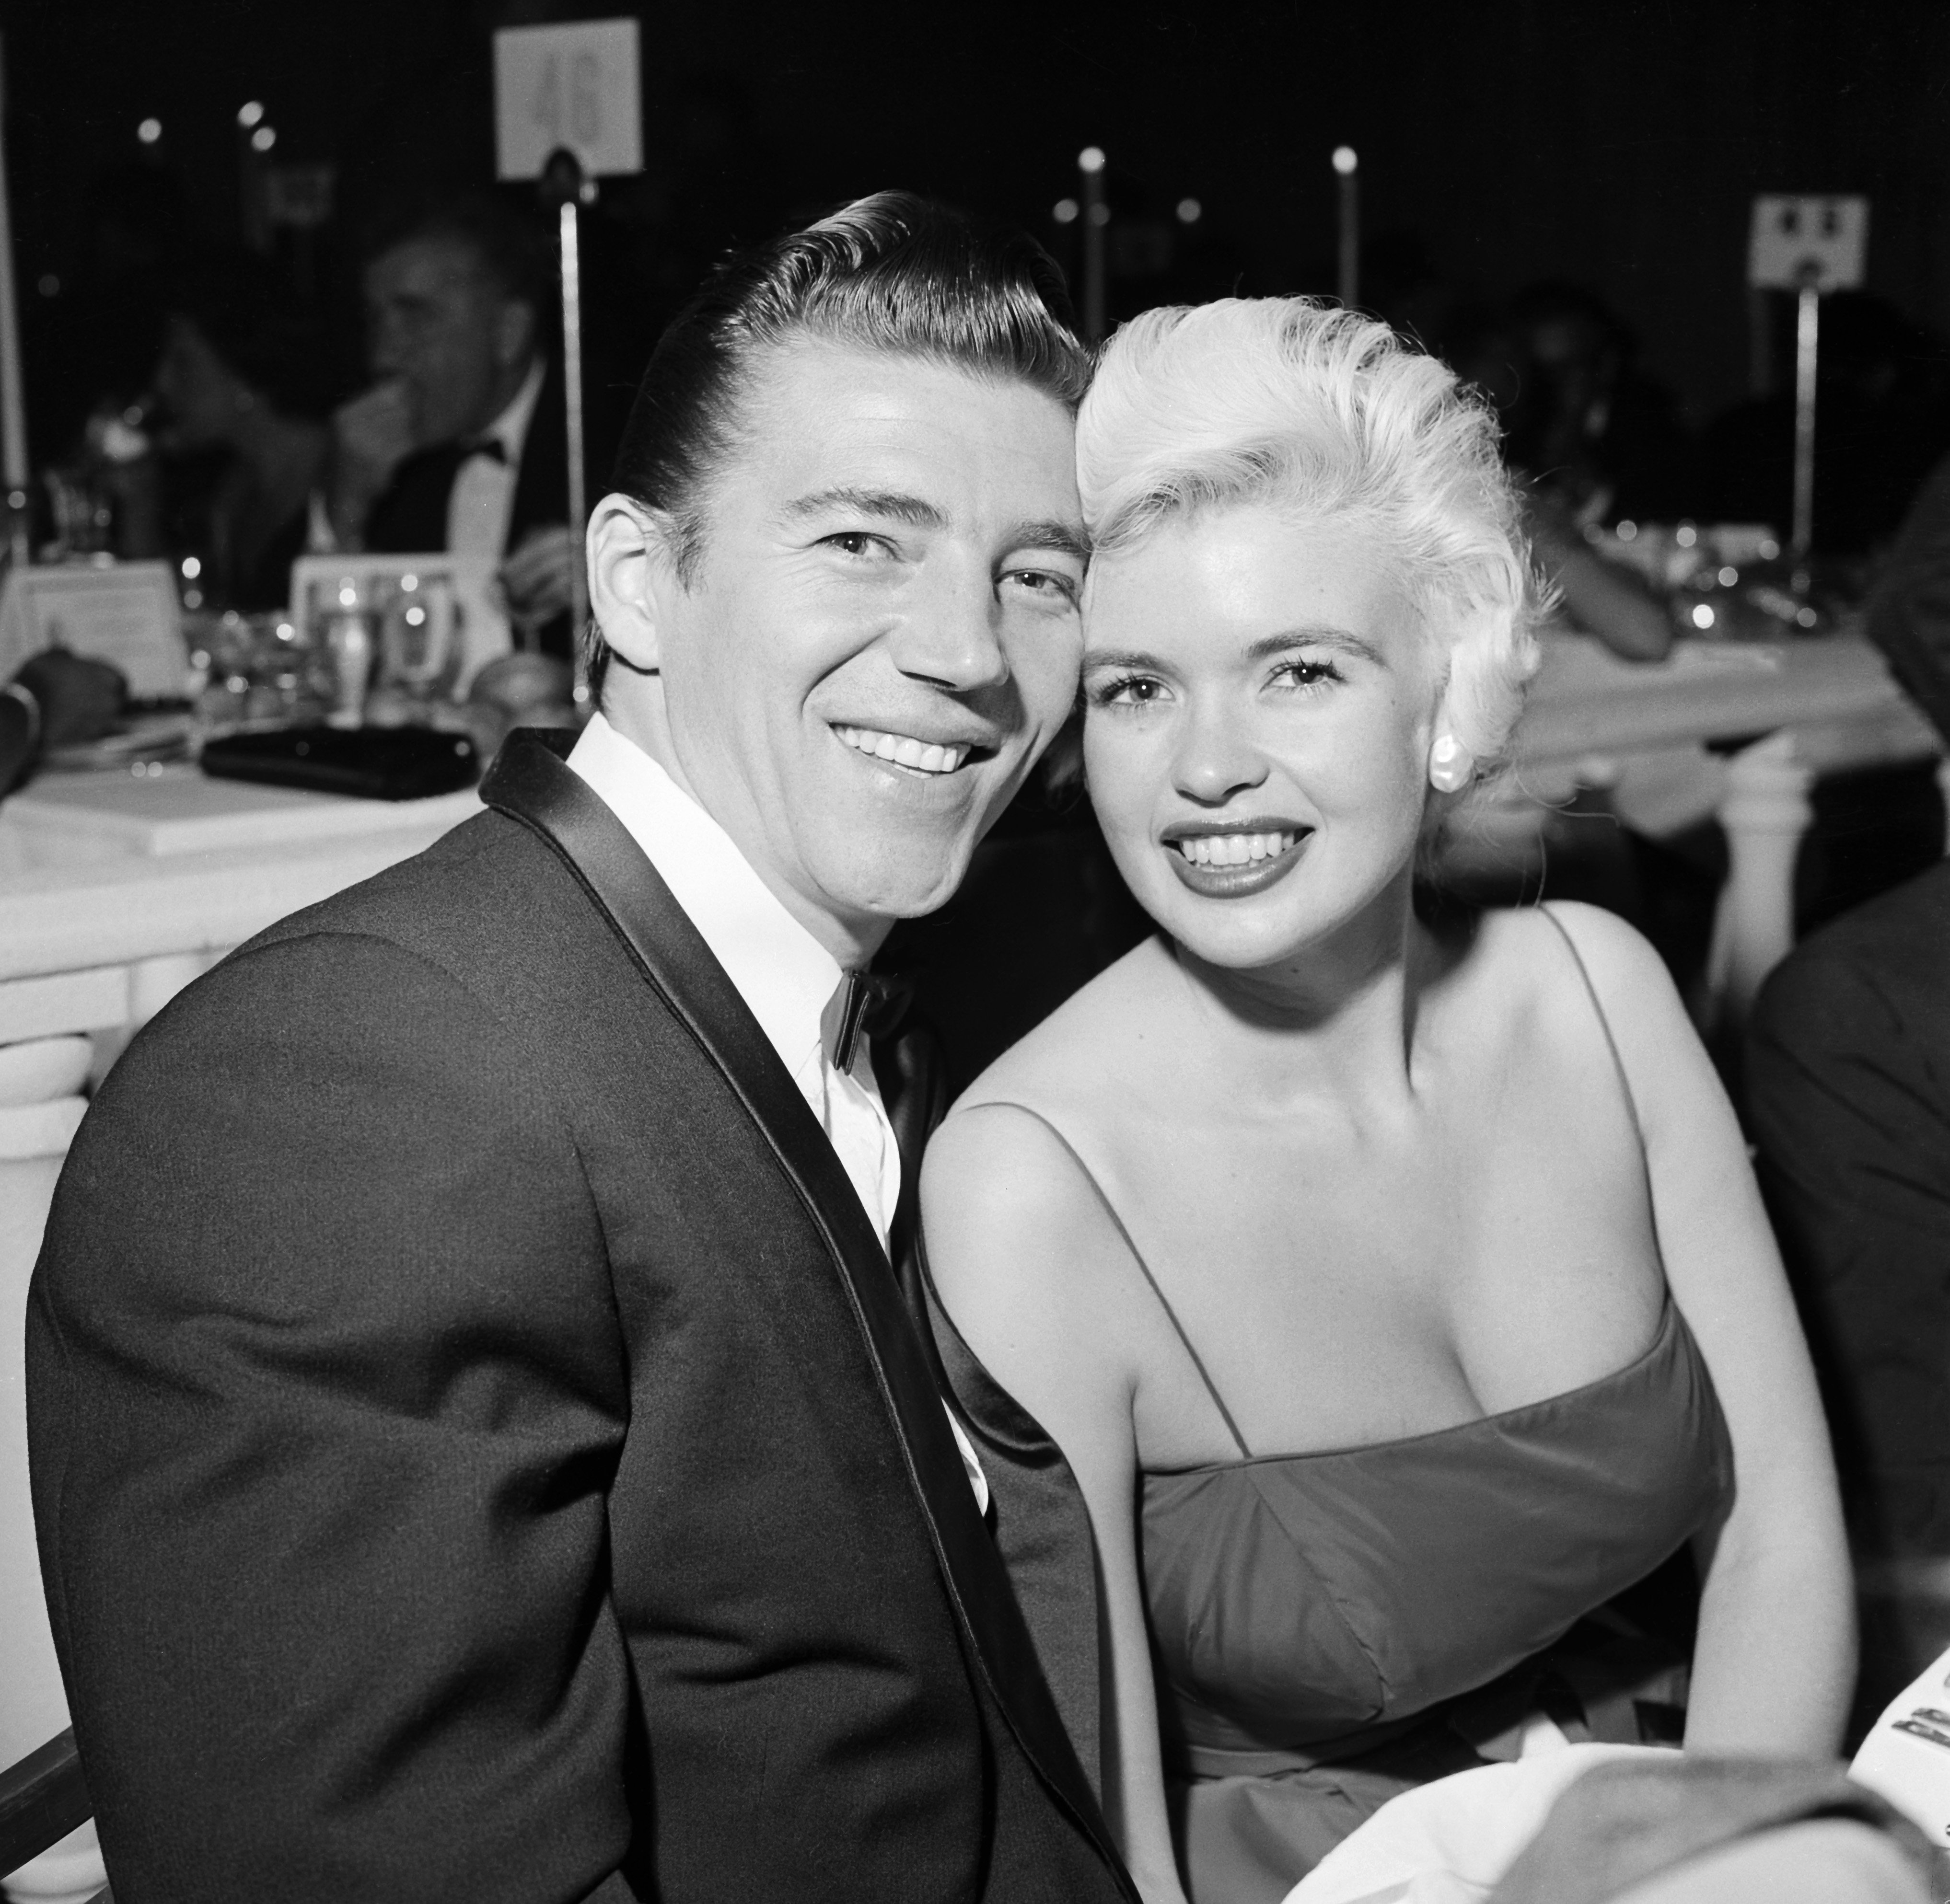  Actress Jayne Mansfield and her husband Mickey Hargitay attend an event in Los Angeles, California, circa 1958 | Source: Getty Images